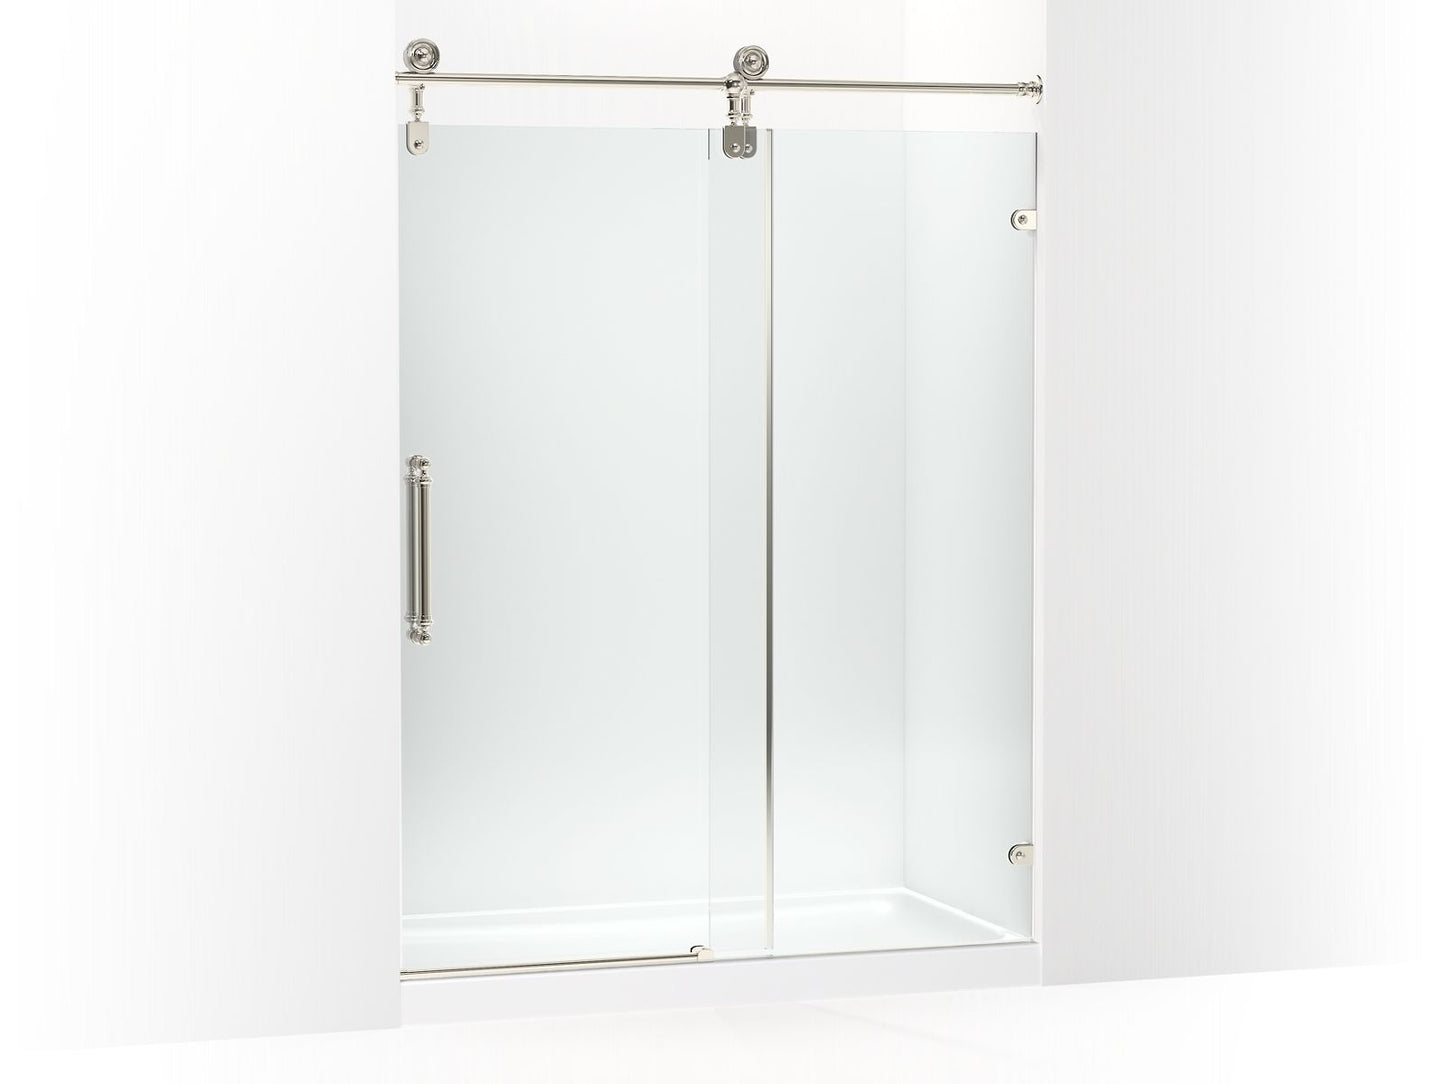 KOHLER K-701725-10L-SN Artifacts 80-7/8" H Sliding Shower Door With 3/8"-Thick Glass In Vibrant Polished Nickel